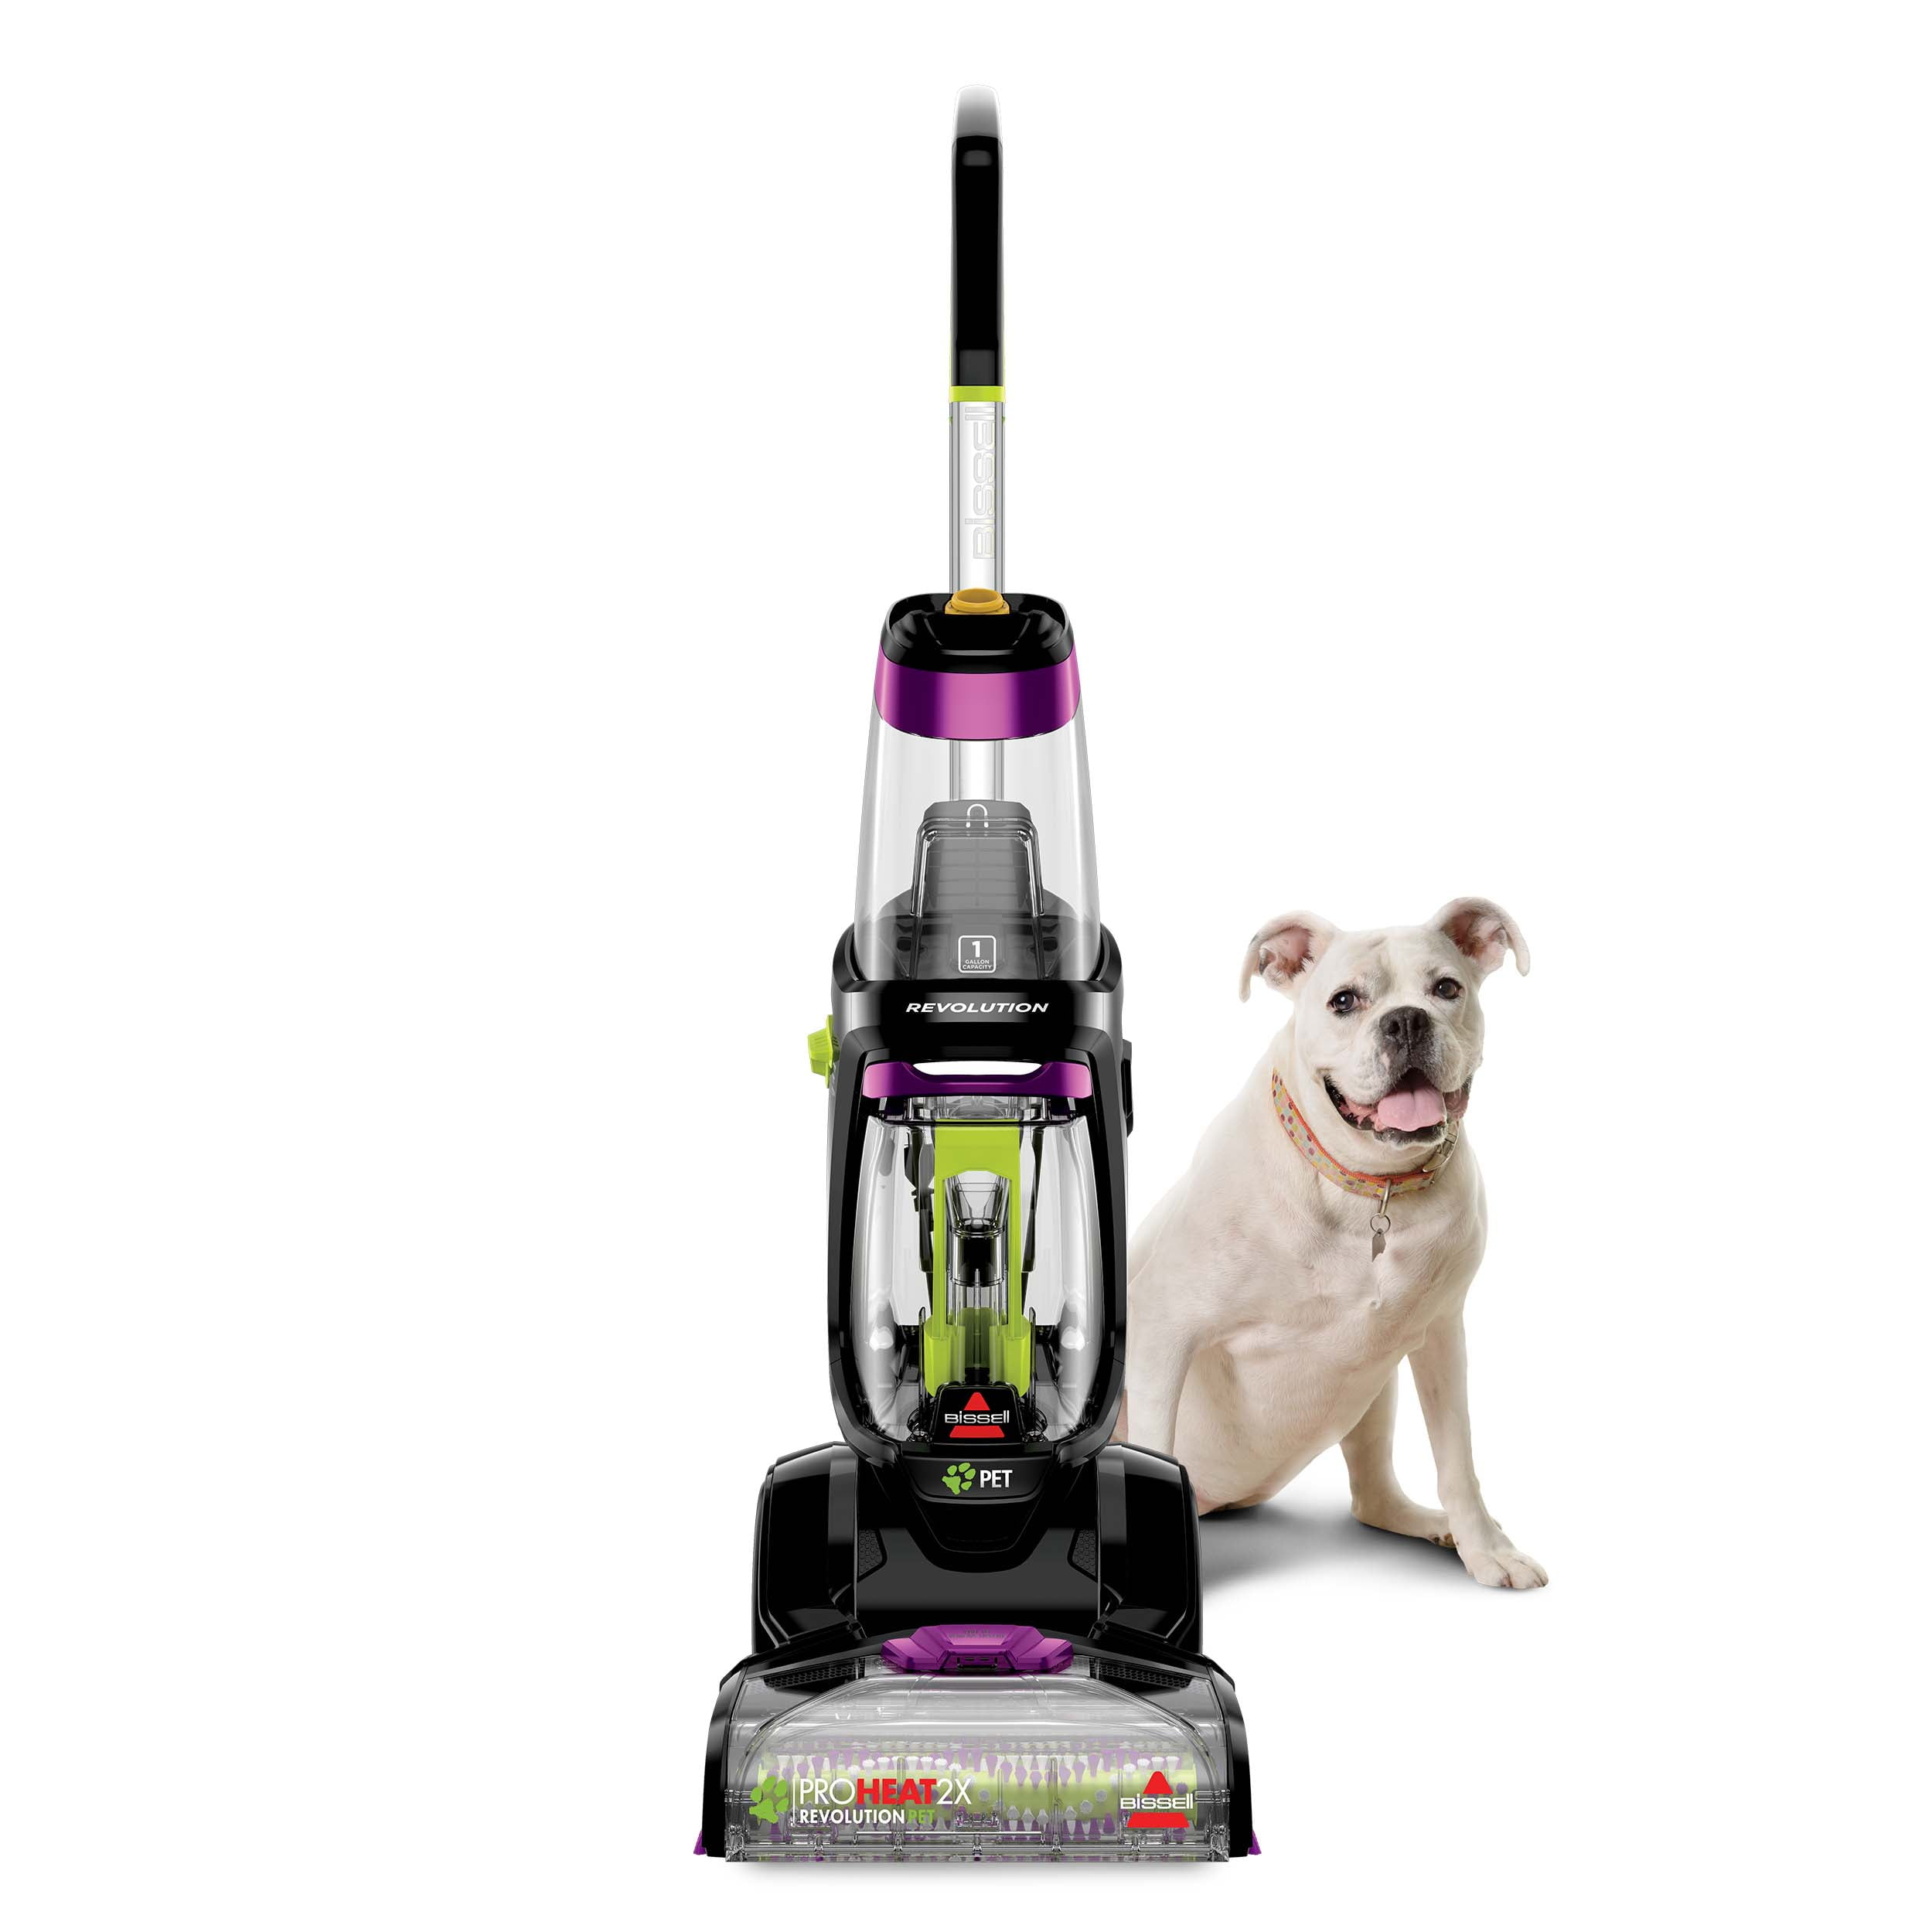 This Highly Rated Bissell Carpet Cleaner Is on Sale at